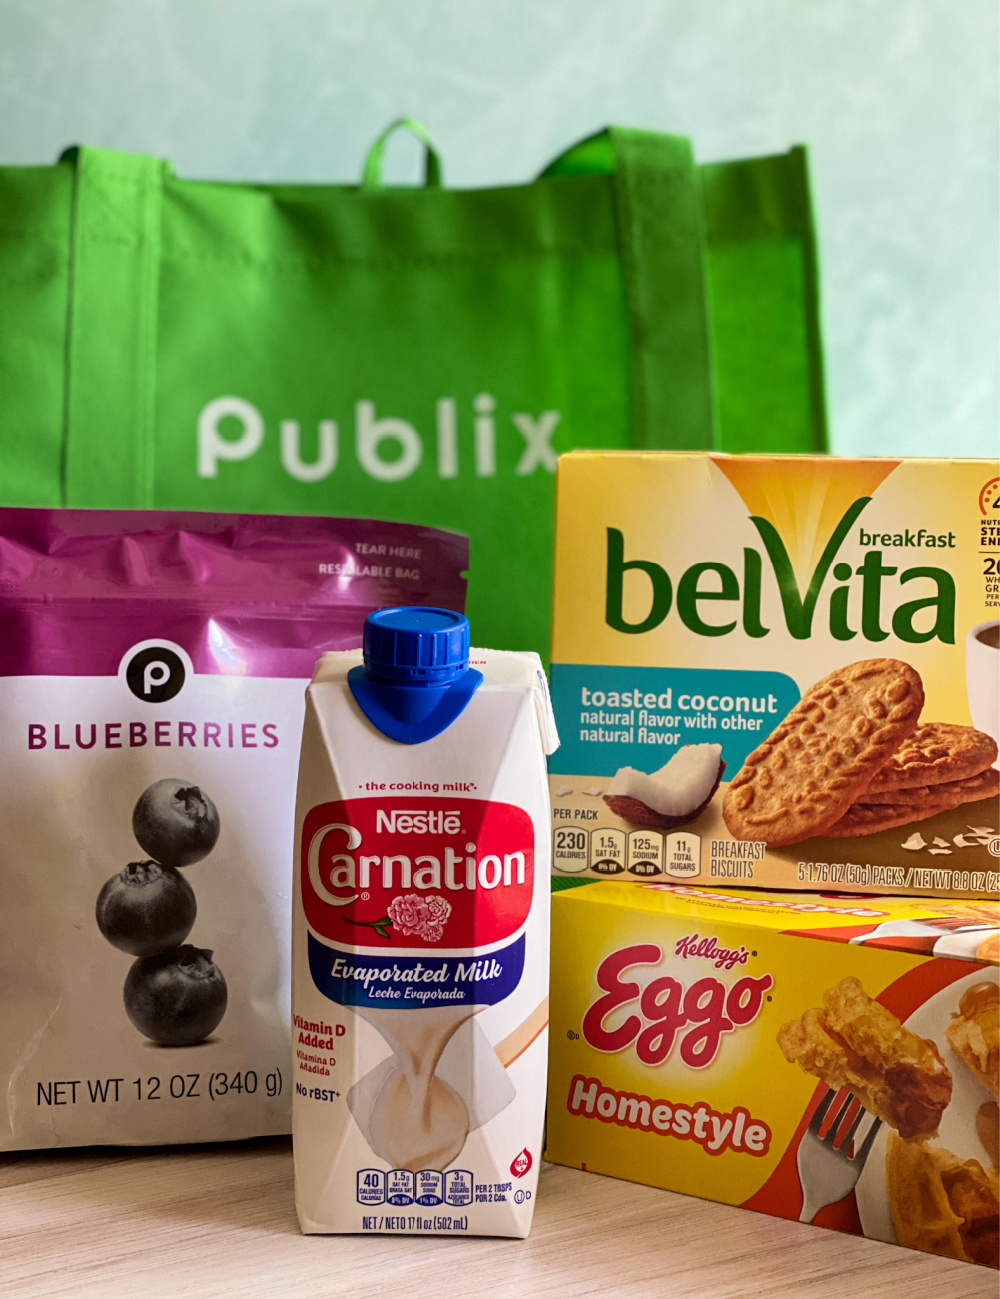 An image showing several products including carnation milk, Publix frozen blueberries, Belvita cookies, and Eggo waffles.